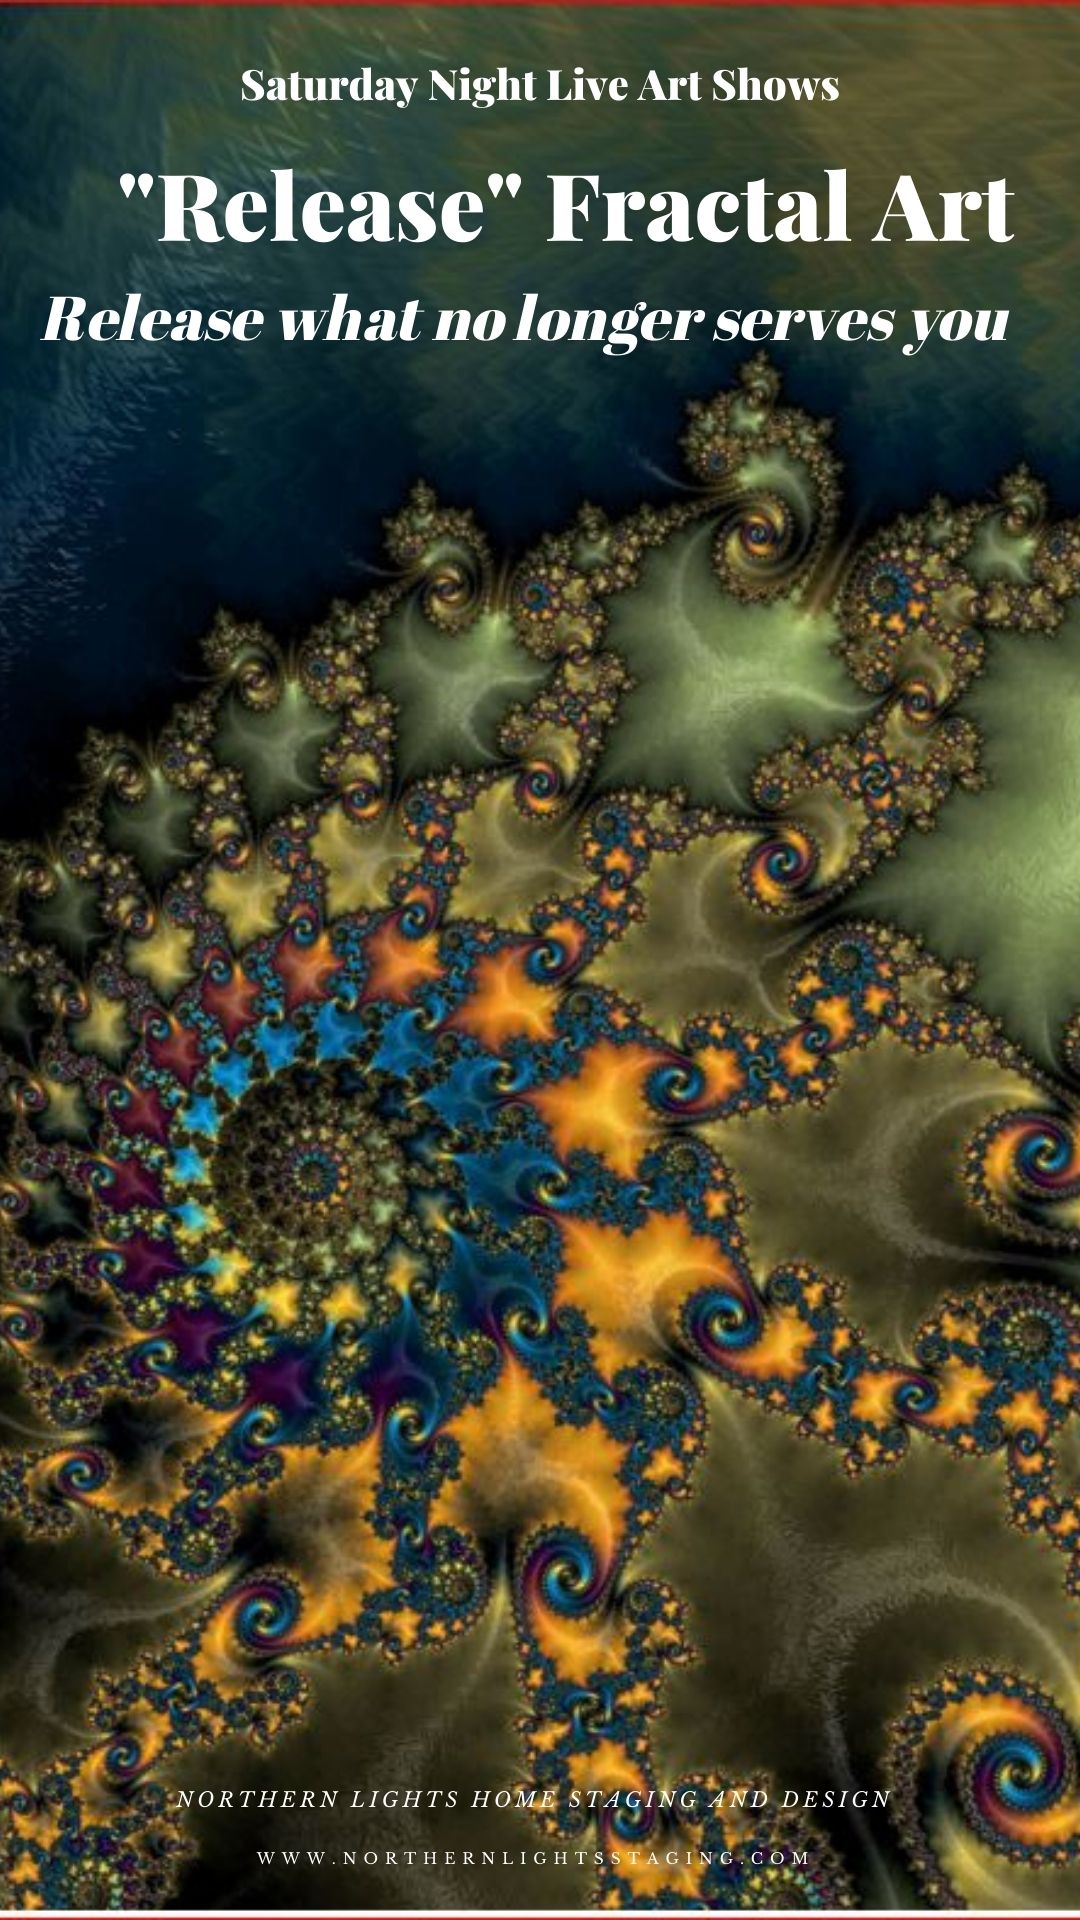 Saturday Night Live Art Shows- "Release" Fractal Art by Mary Ann Benoit of Northern Lights Home Staging and Design